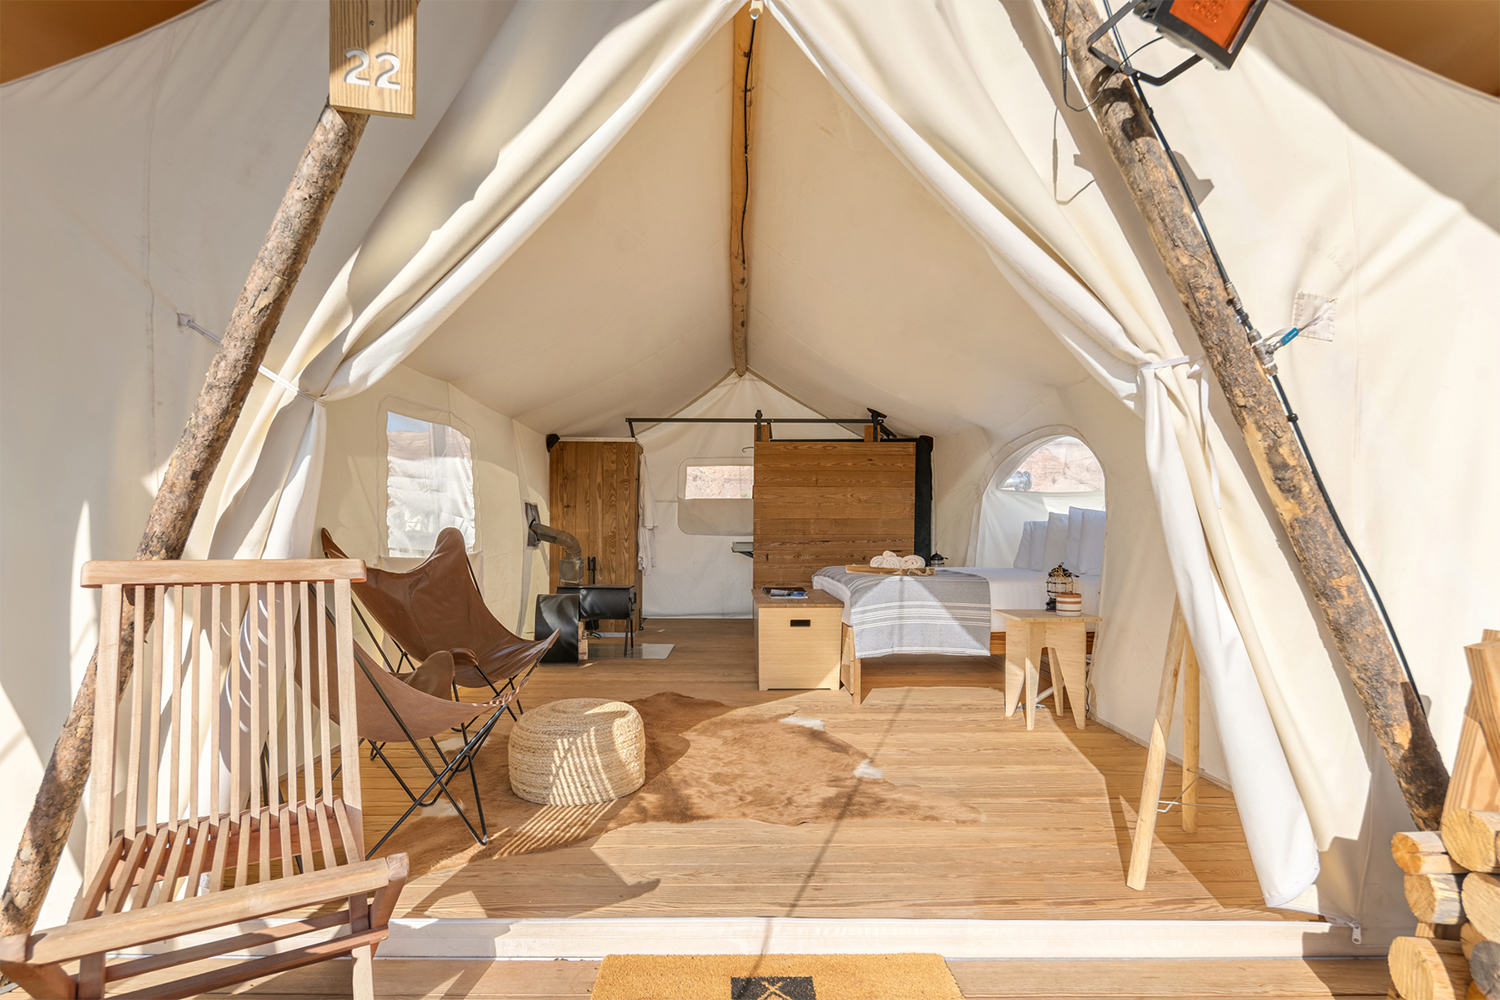 A looking inside a glamping tent in the new Under Canvas location in Bryce Canyon, Utah